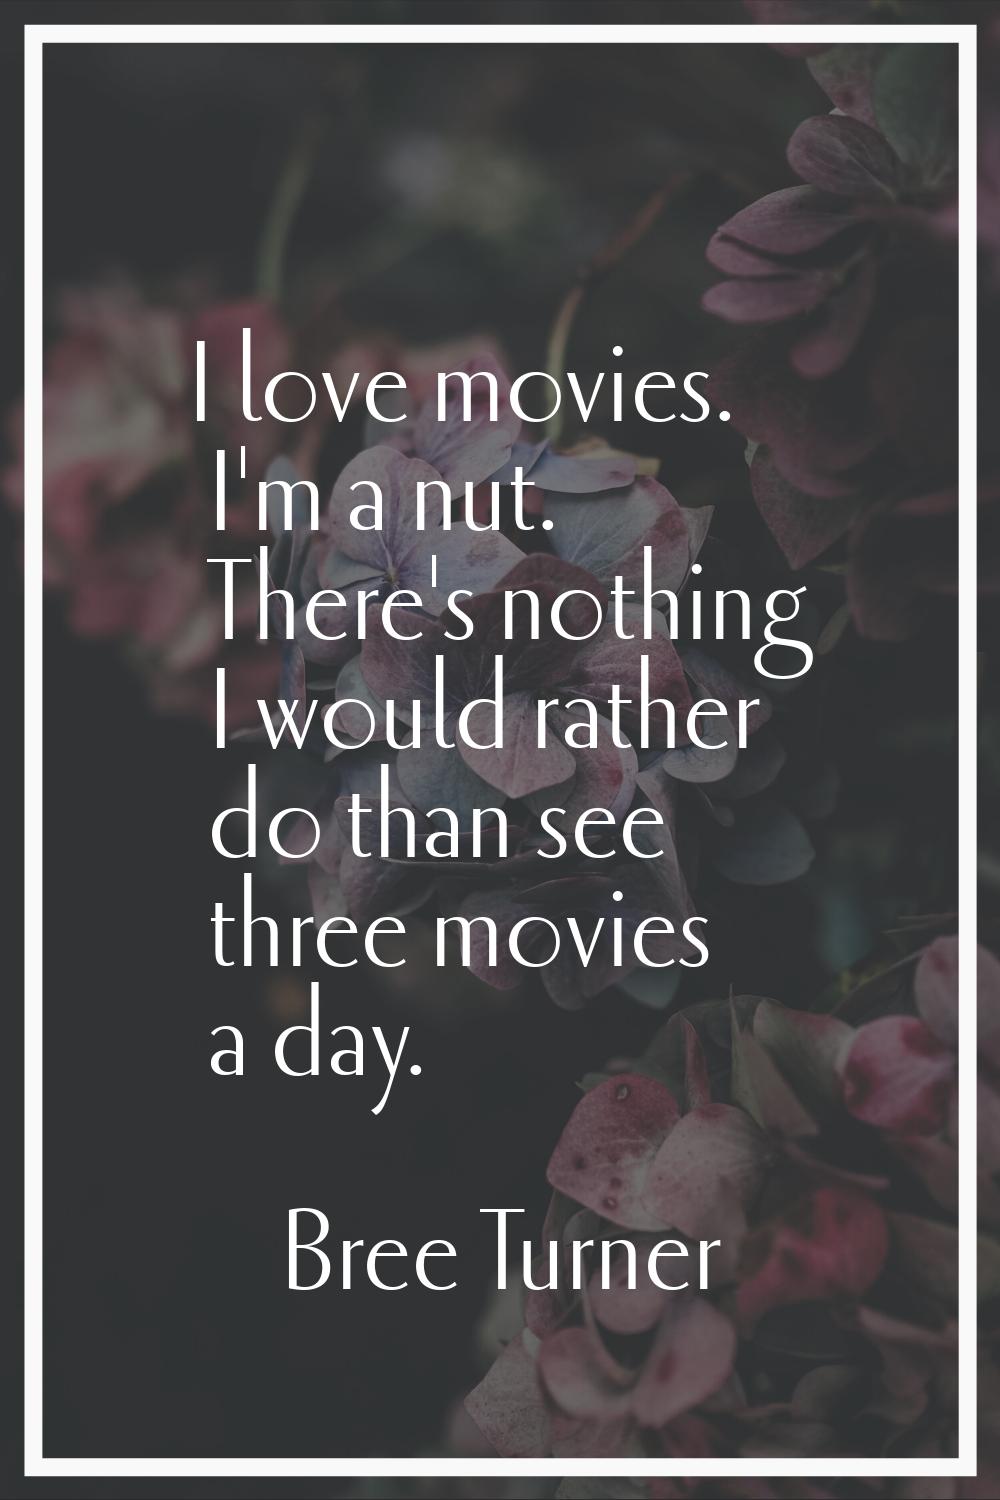 I love movies. I'm a nut. There's nothing I would rather do than see three movies a day.